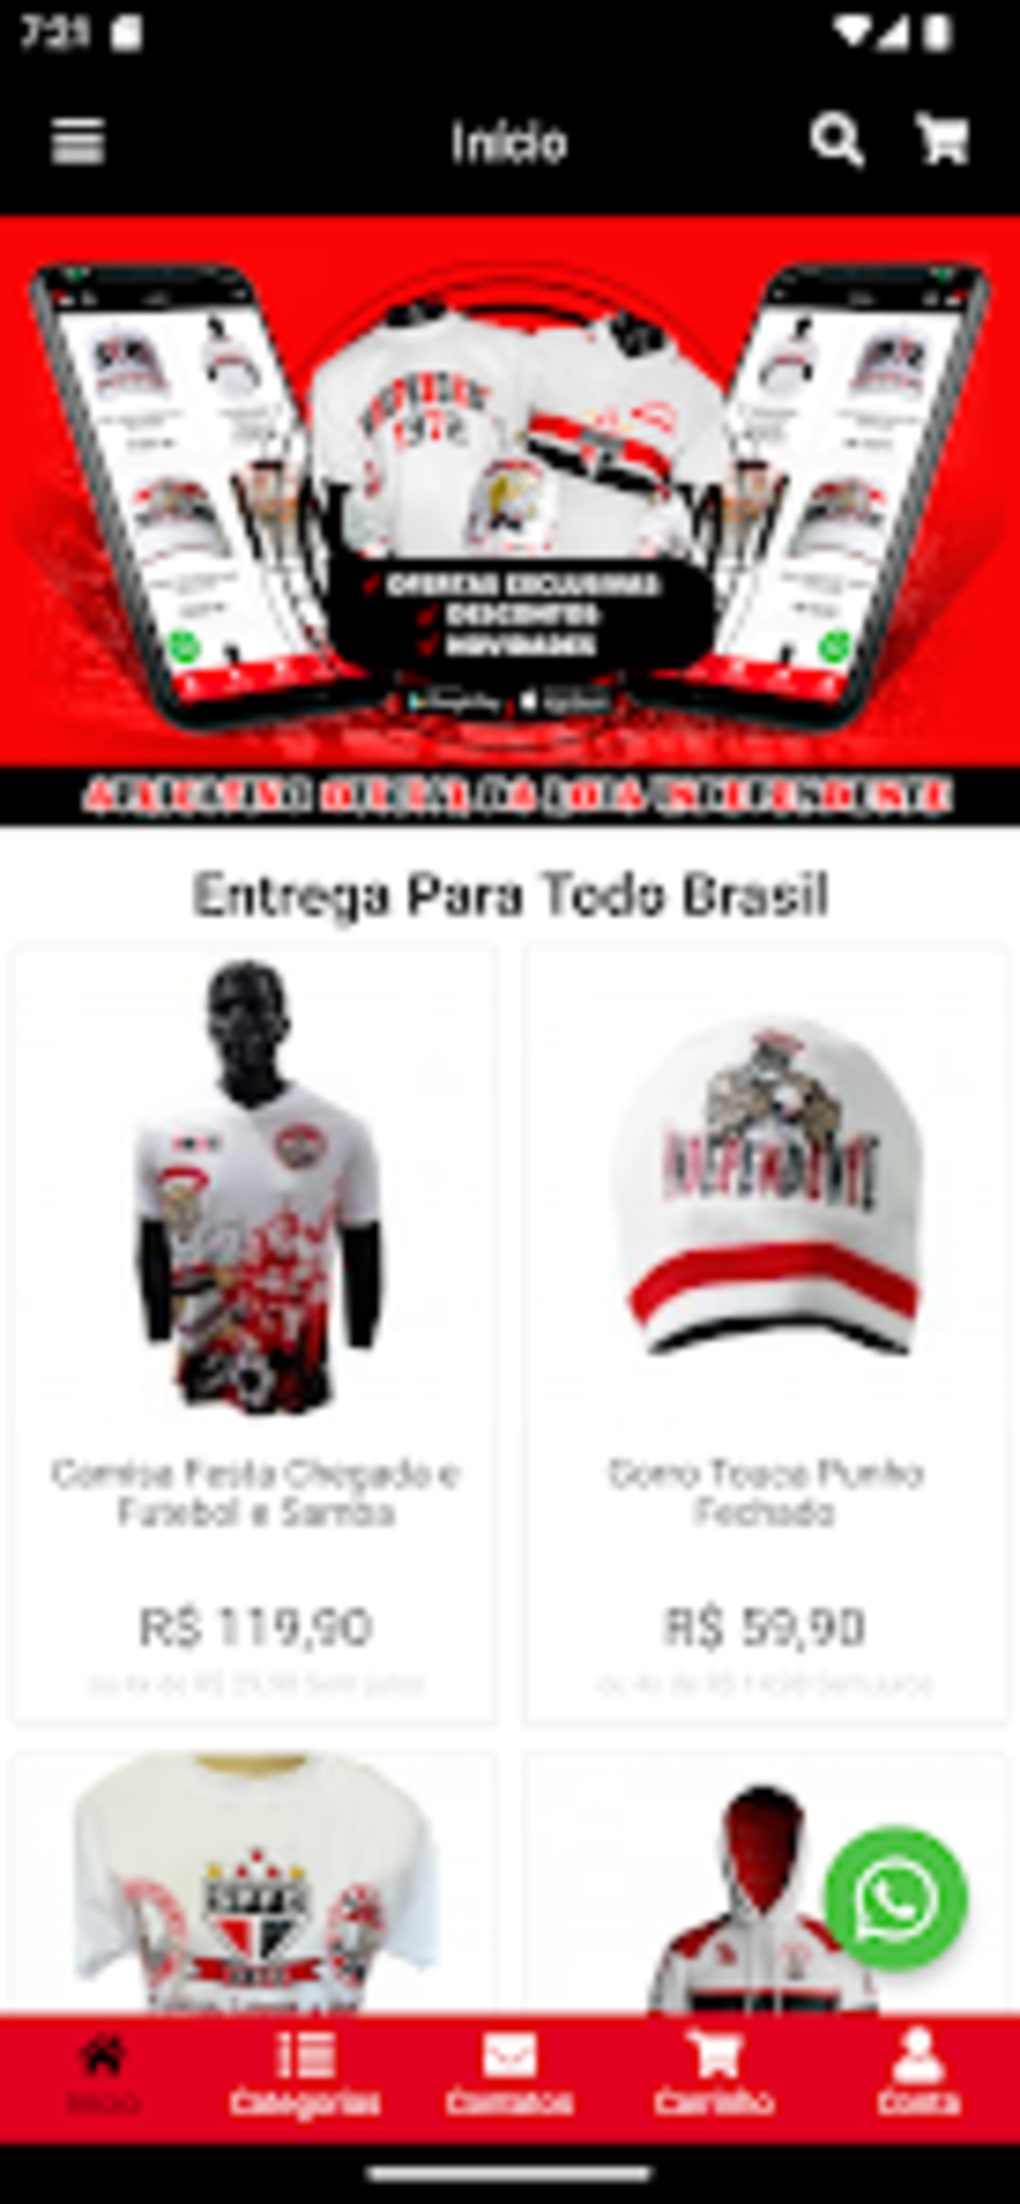 Torcida Gifts & Merchandise for Sale